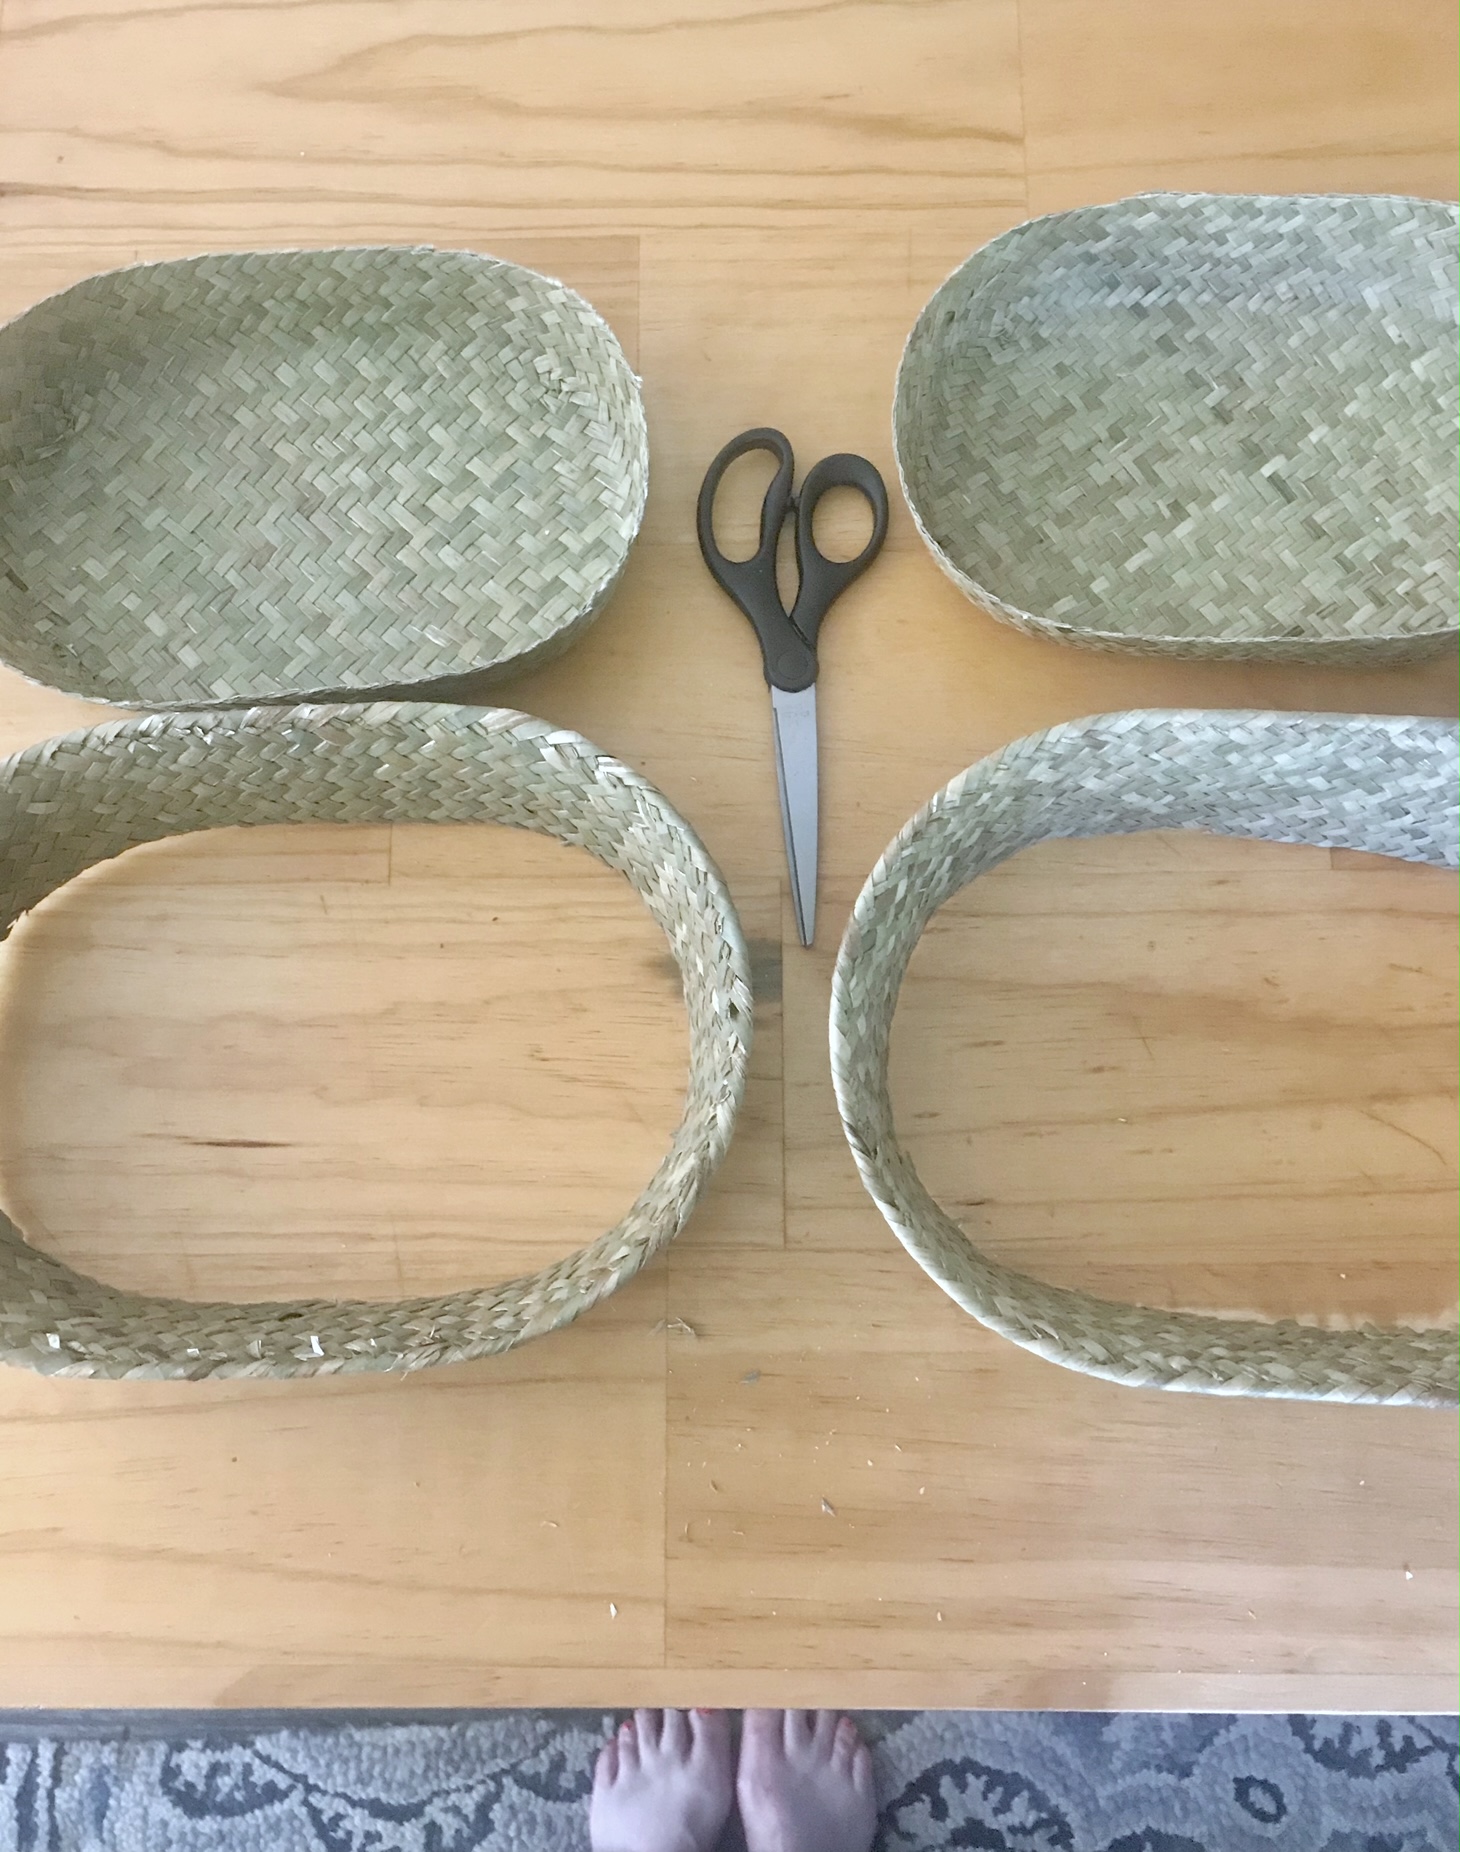 small baskets cut in two.